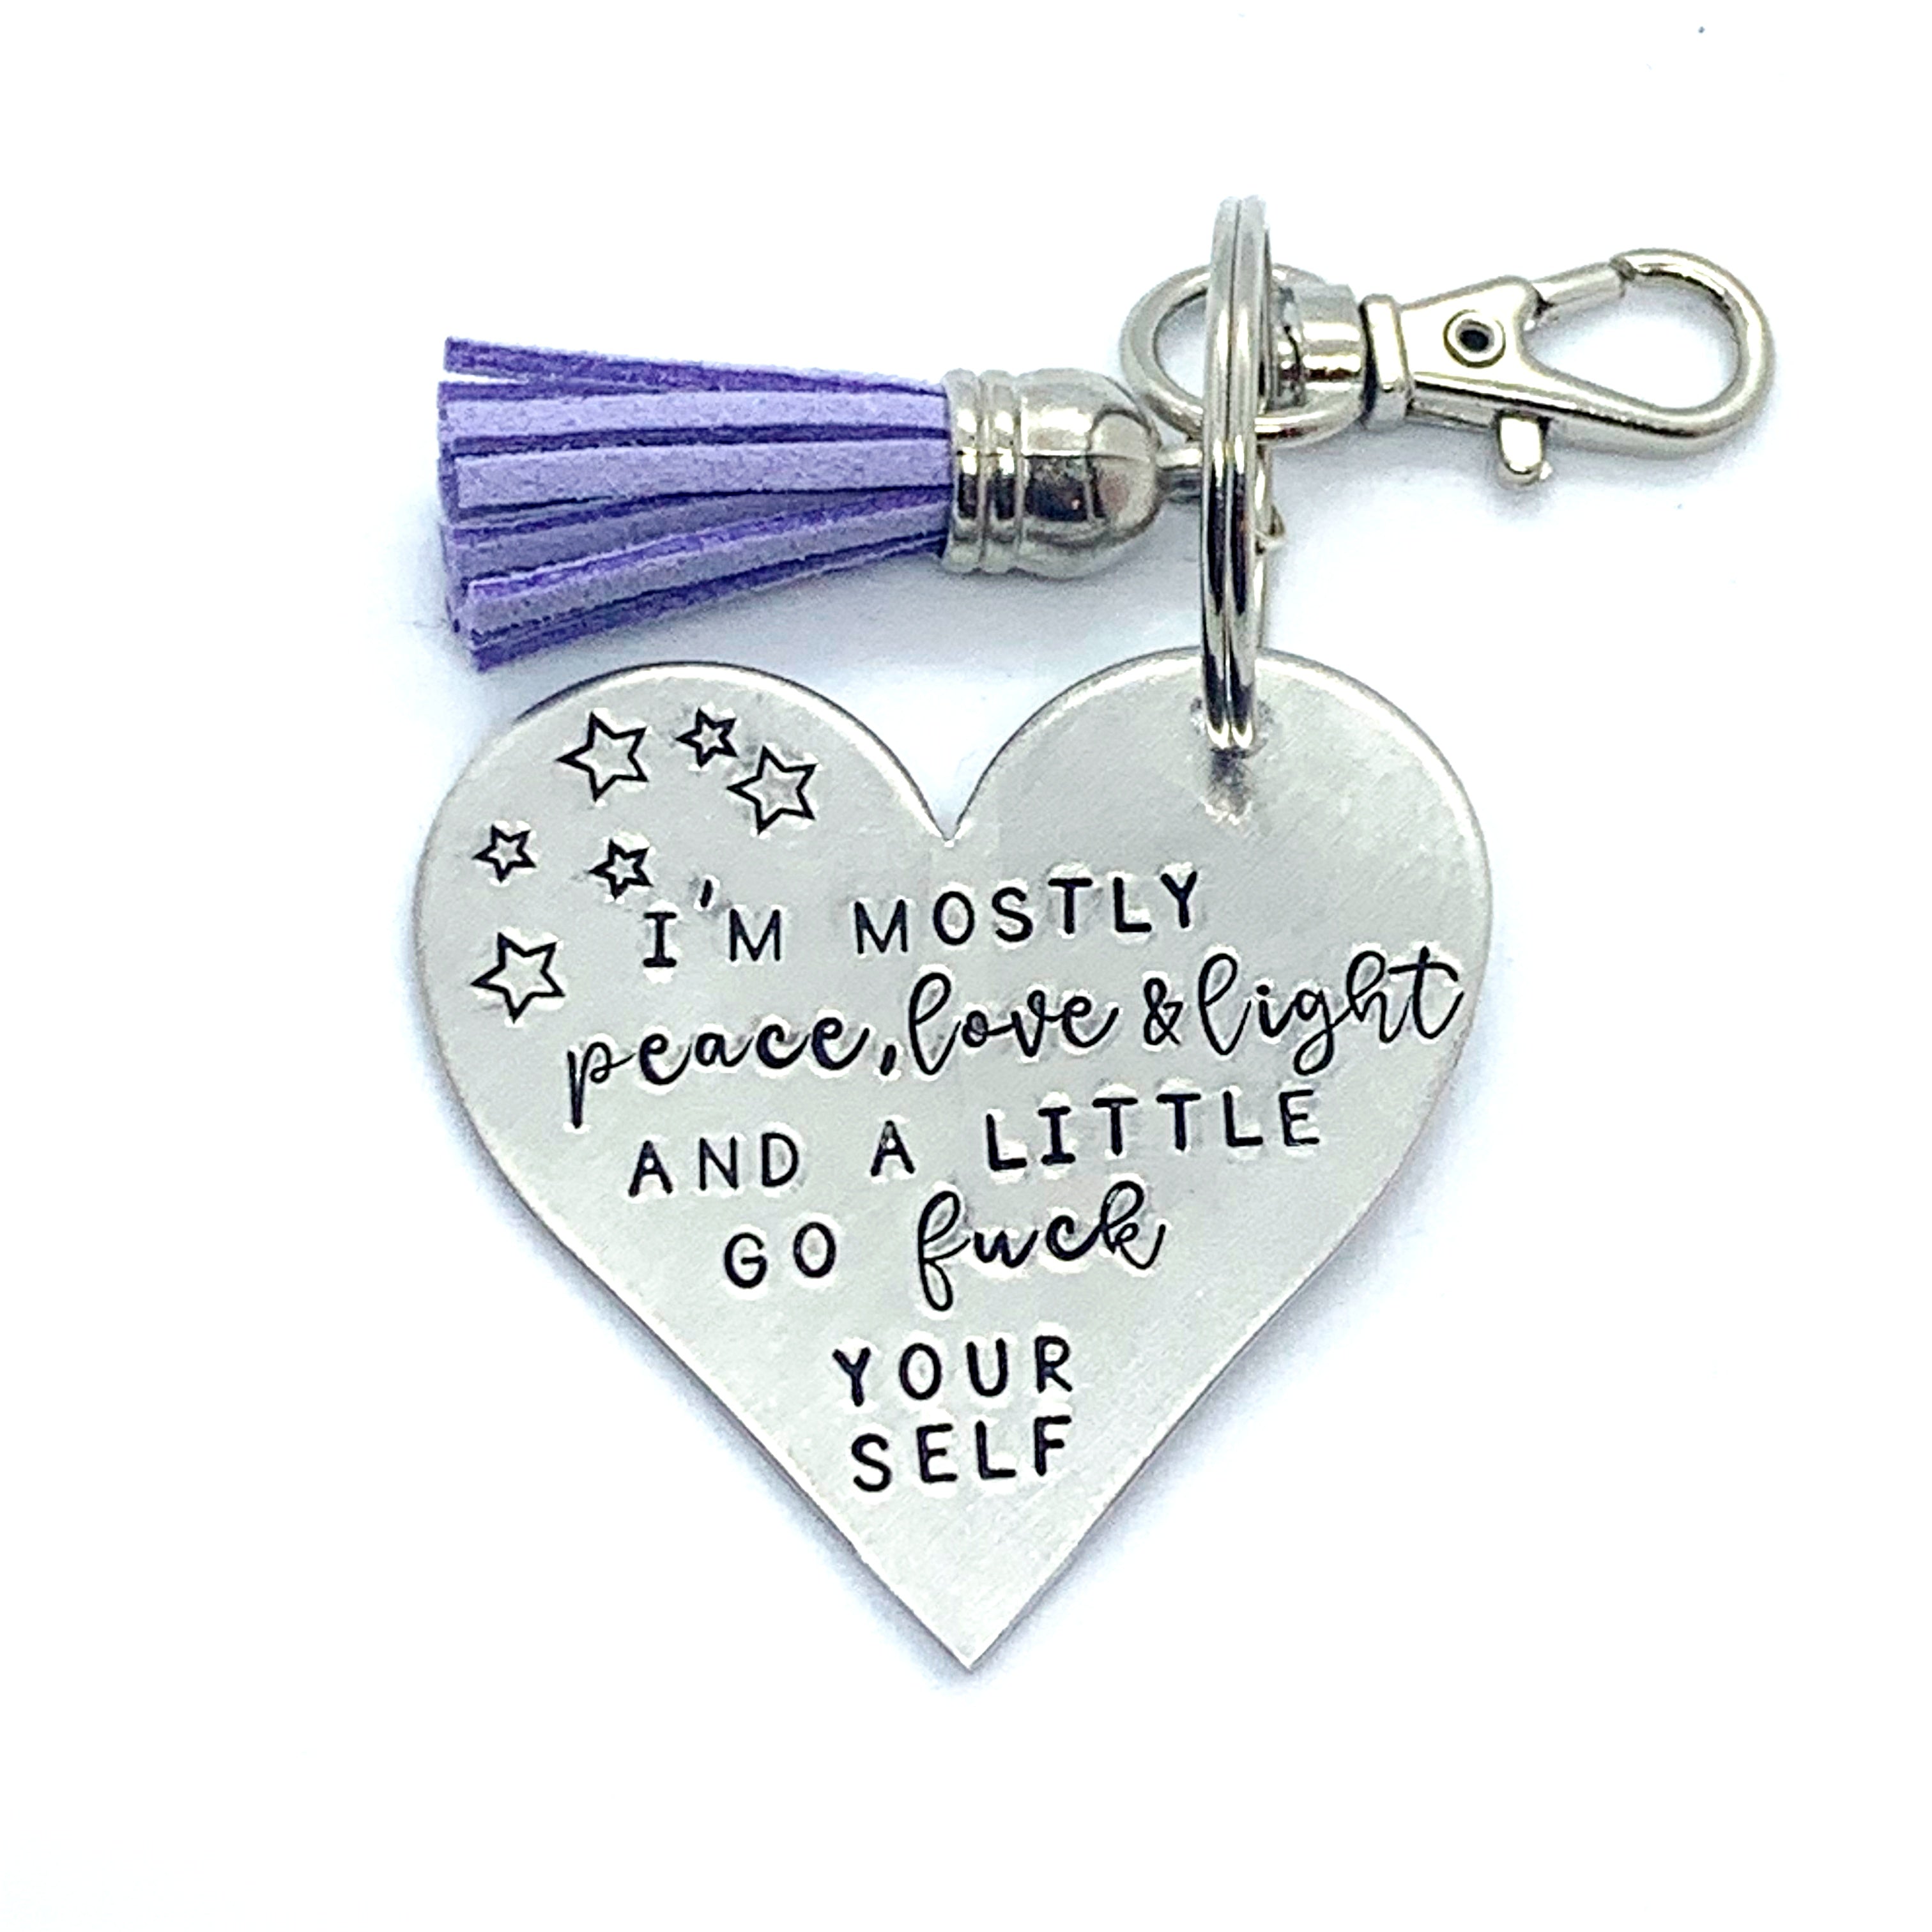 Key Chain - Heart Shape - I’m mostly peace love and light and a little go fuck yourself